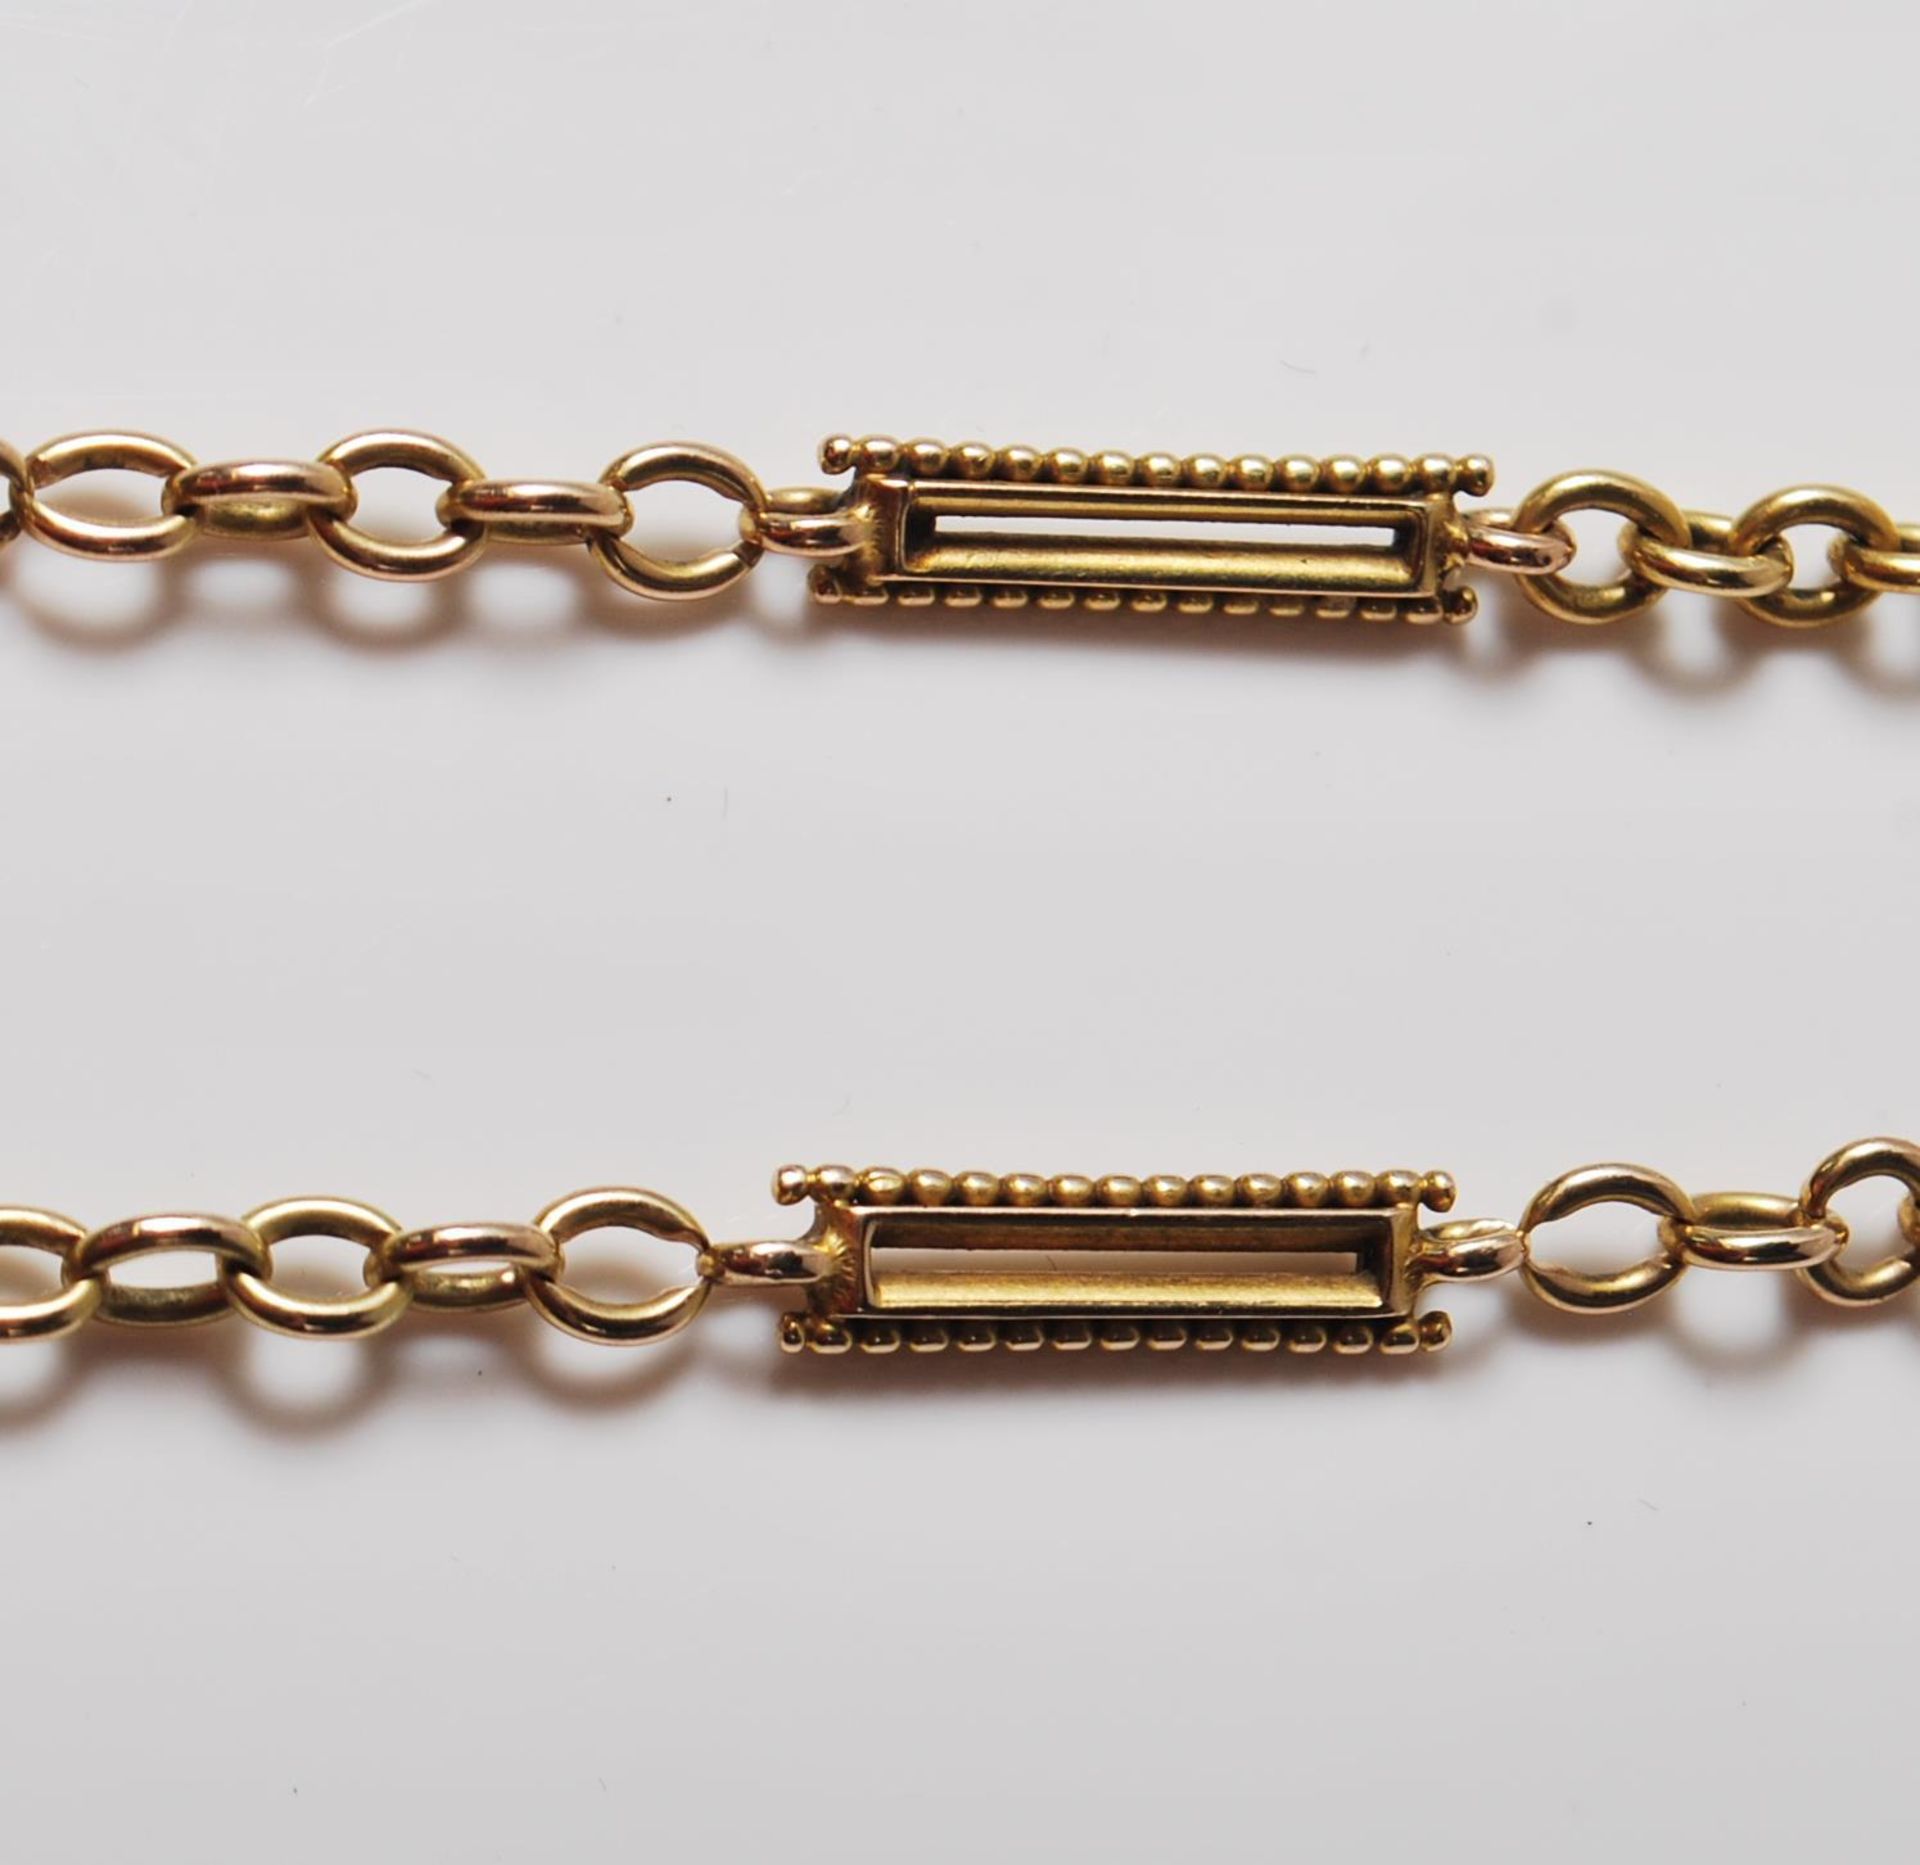 15CT GOLD BAR LINK POCKET WATCH CHAIN - Image 3 of 6